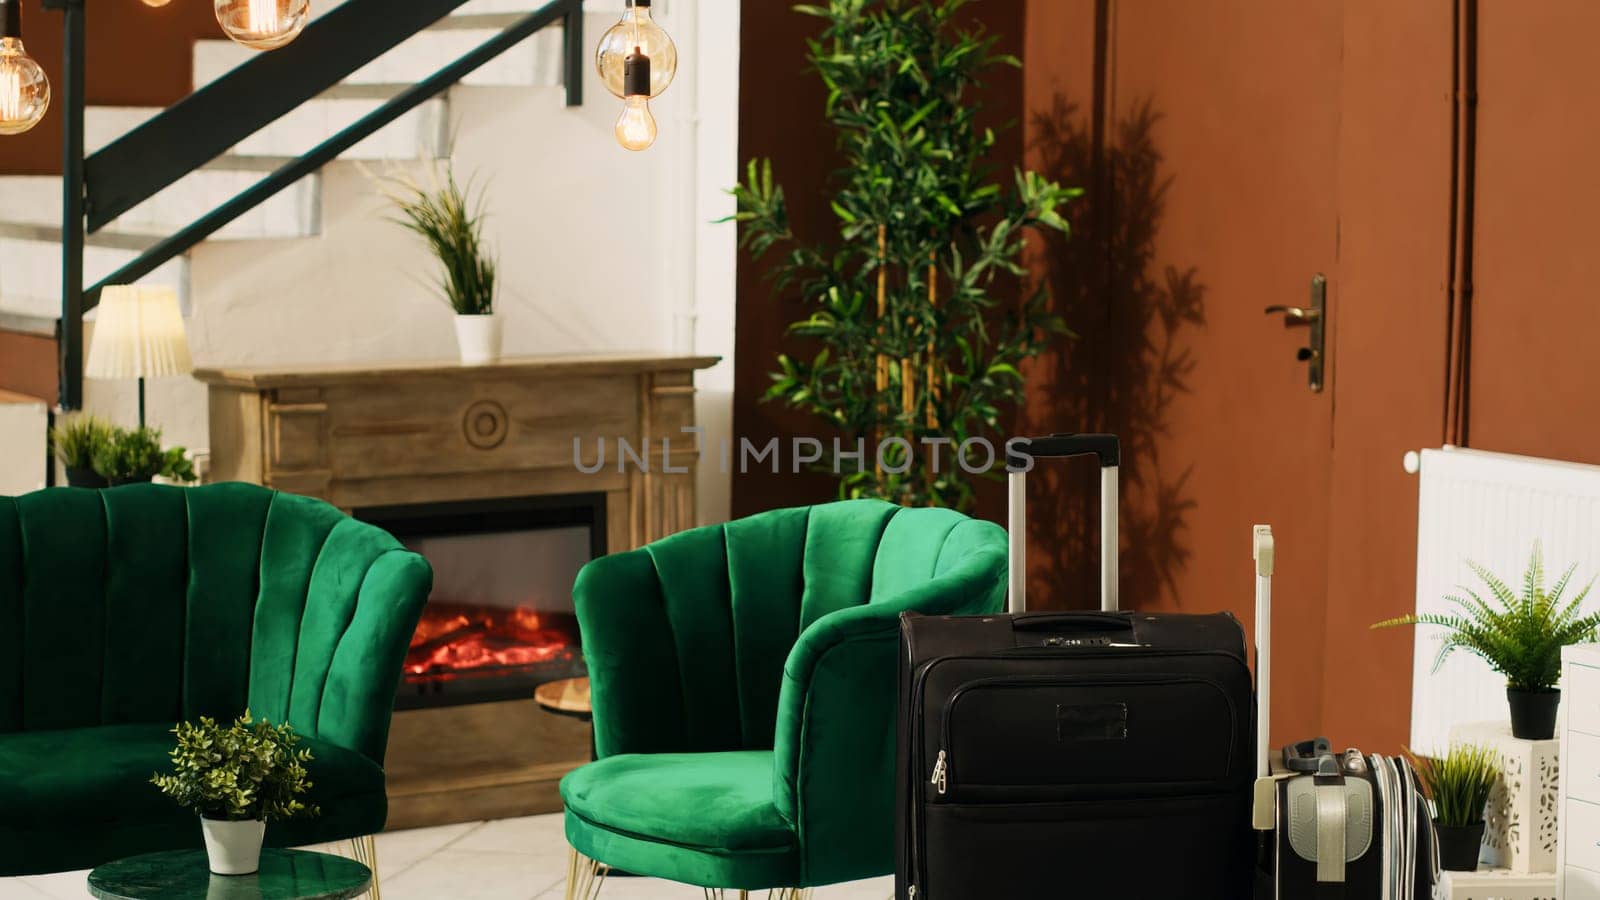 Modern empty lounge area with luggage and classy furniture, luxurious interior design in hotel lobby. Expensive rooms resort decorated with elegant lights and plants, trolley bags.